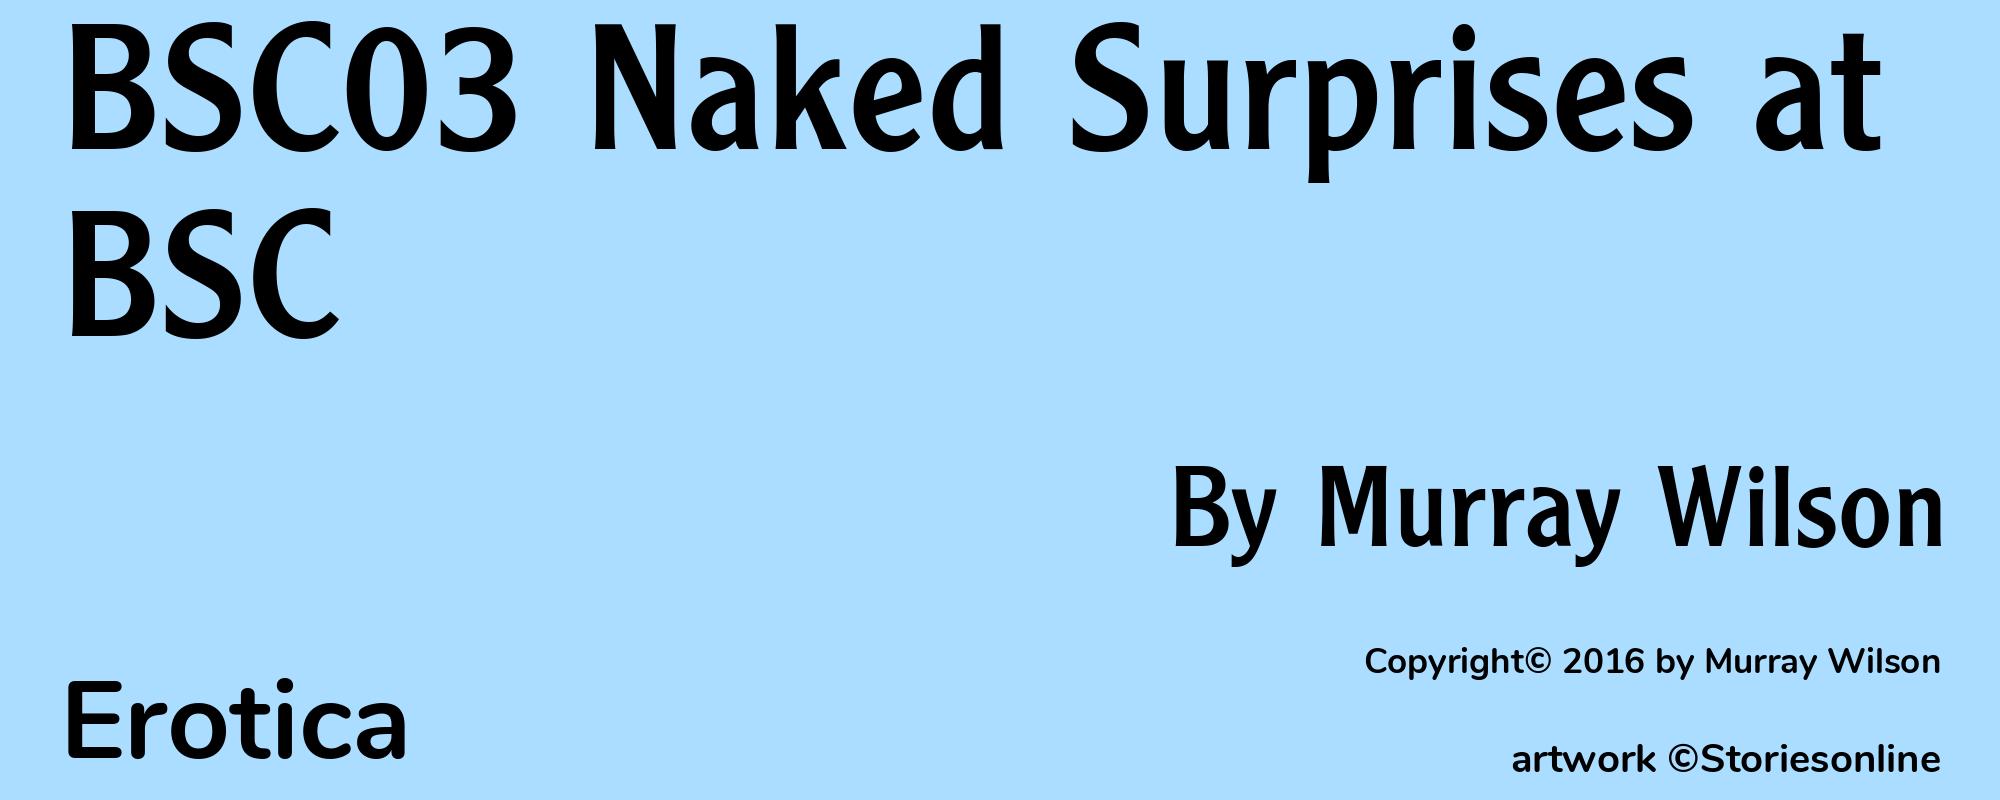 BSC03 Naked Surprises at BSC - Cover